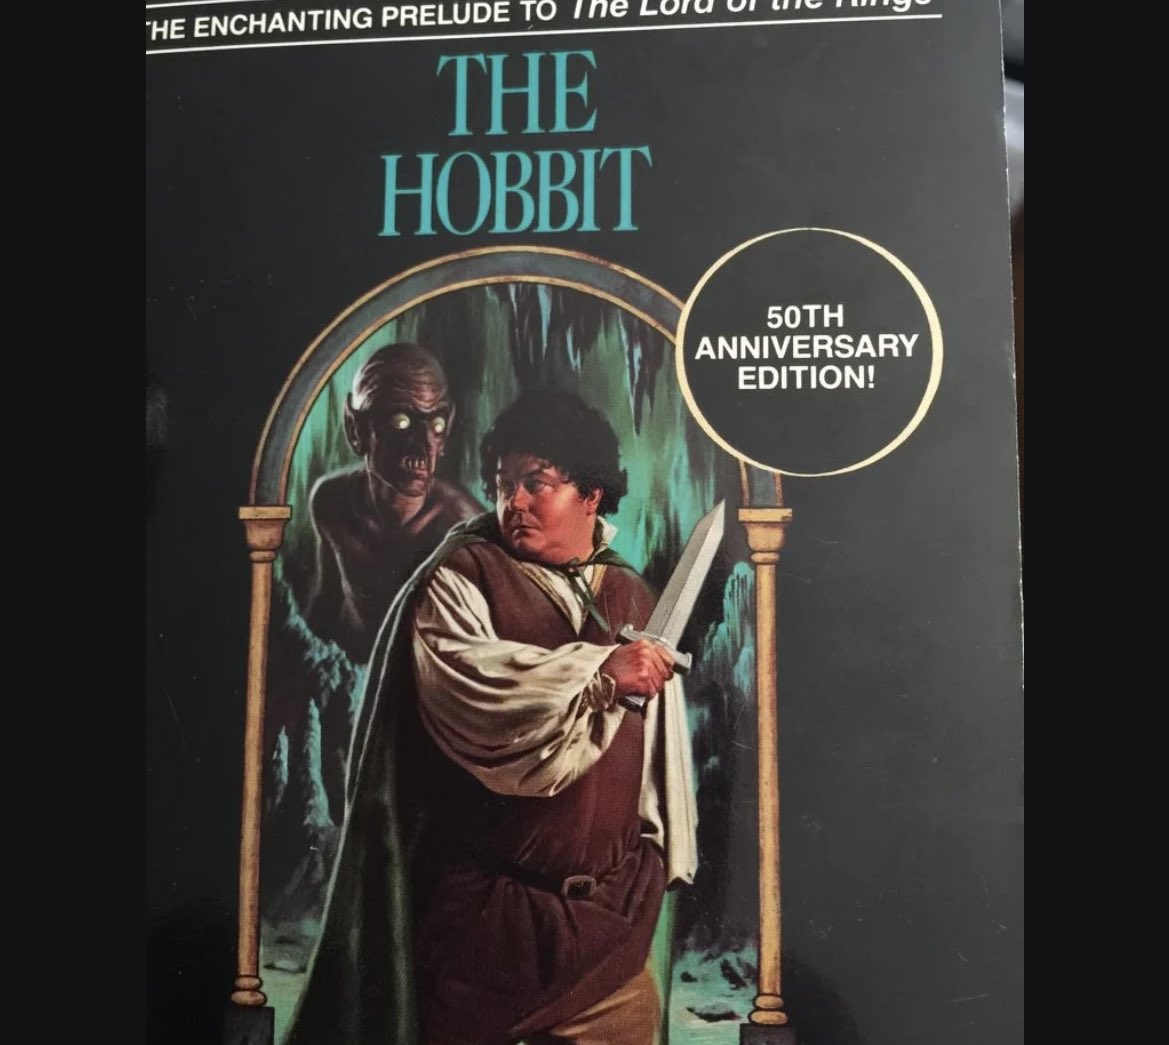 Happy 85th birthday to The Hobbit that was released on this day in 1937. 

And happy 35th birthday to this 1987 cover that makes Bilbo look like he owns a deli and sub shop in Atlantic City, New Jersey